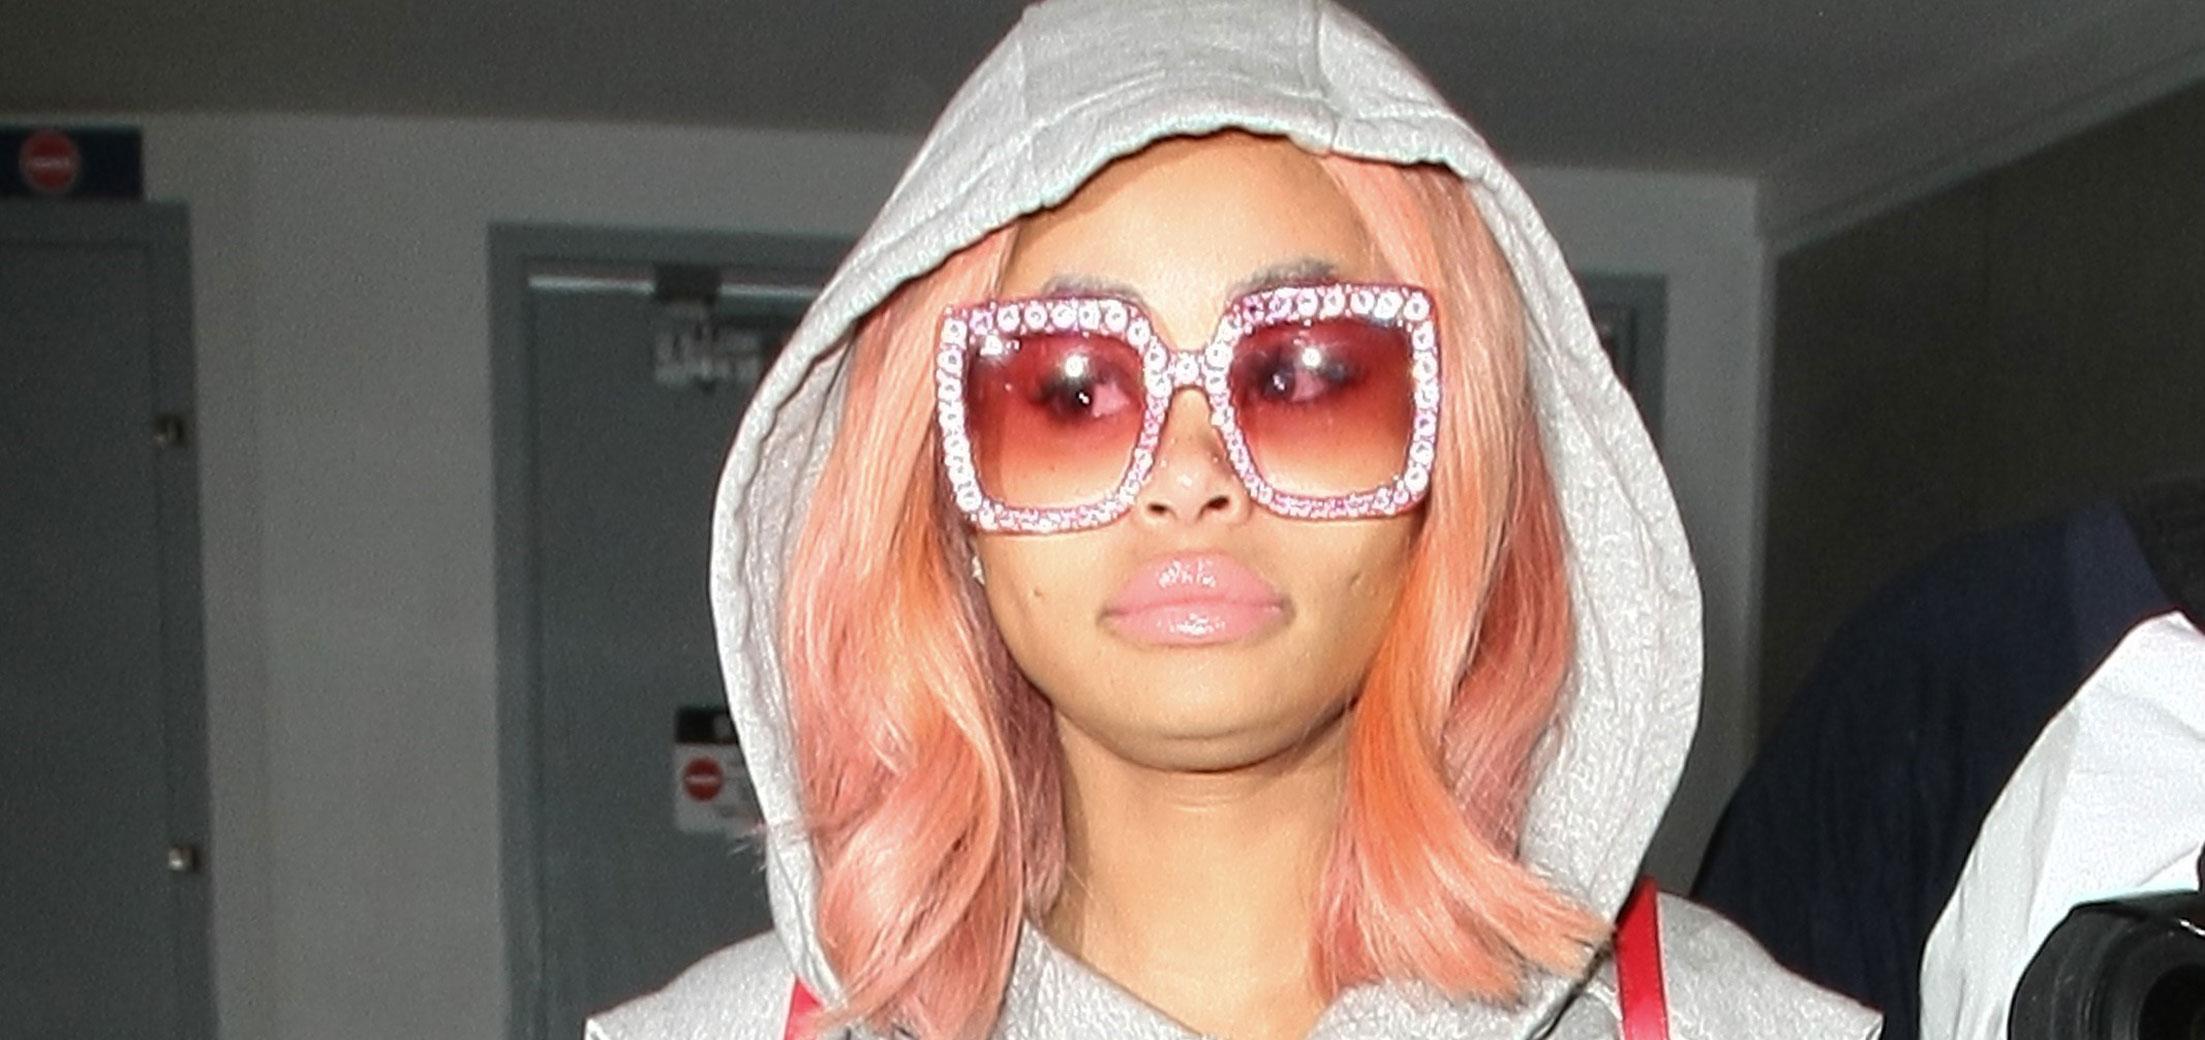 Get A Glimpse Inside Blac Chyna Plastic Surgery Makeover!